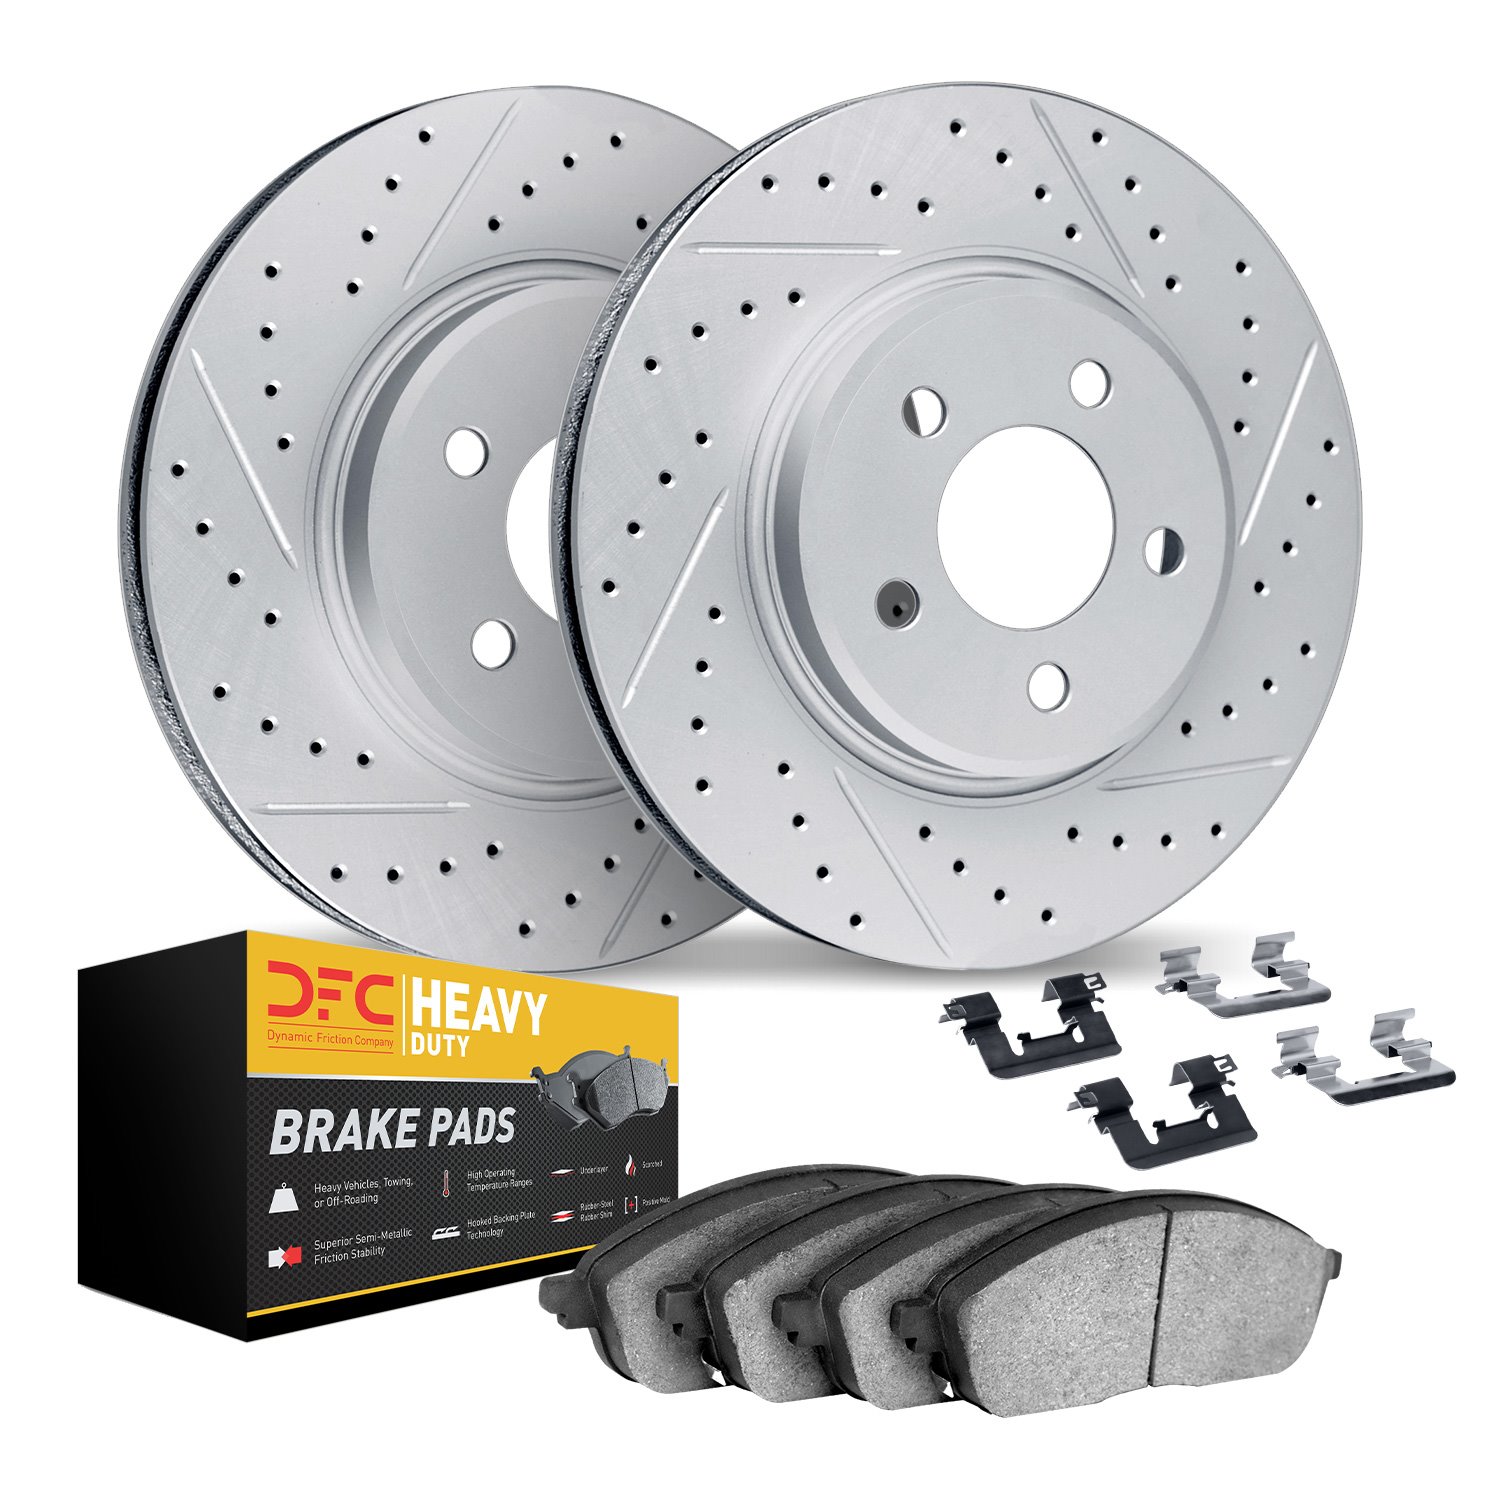 2212-99129 Geoperformance Drilled/Slotted Rotors w/Heavy-Duty Pads Kit & Hardware, 2002-2005 Ford/Lincoln/Mercury/Mazda, Positio